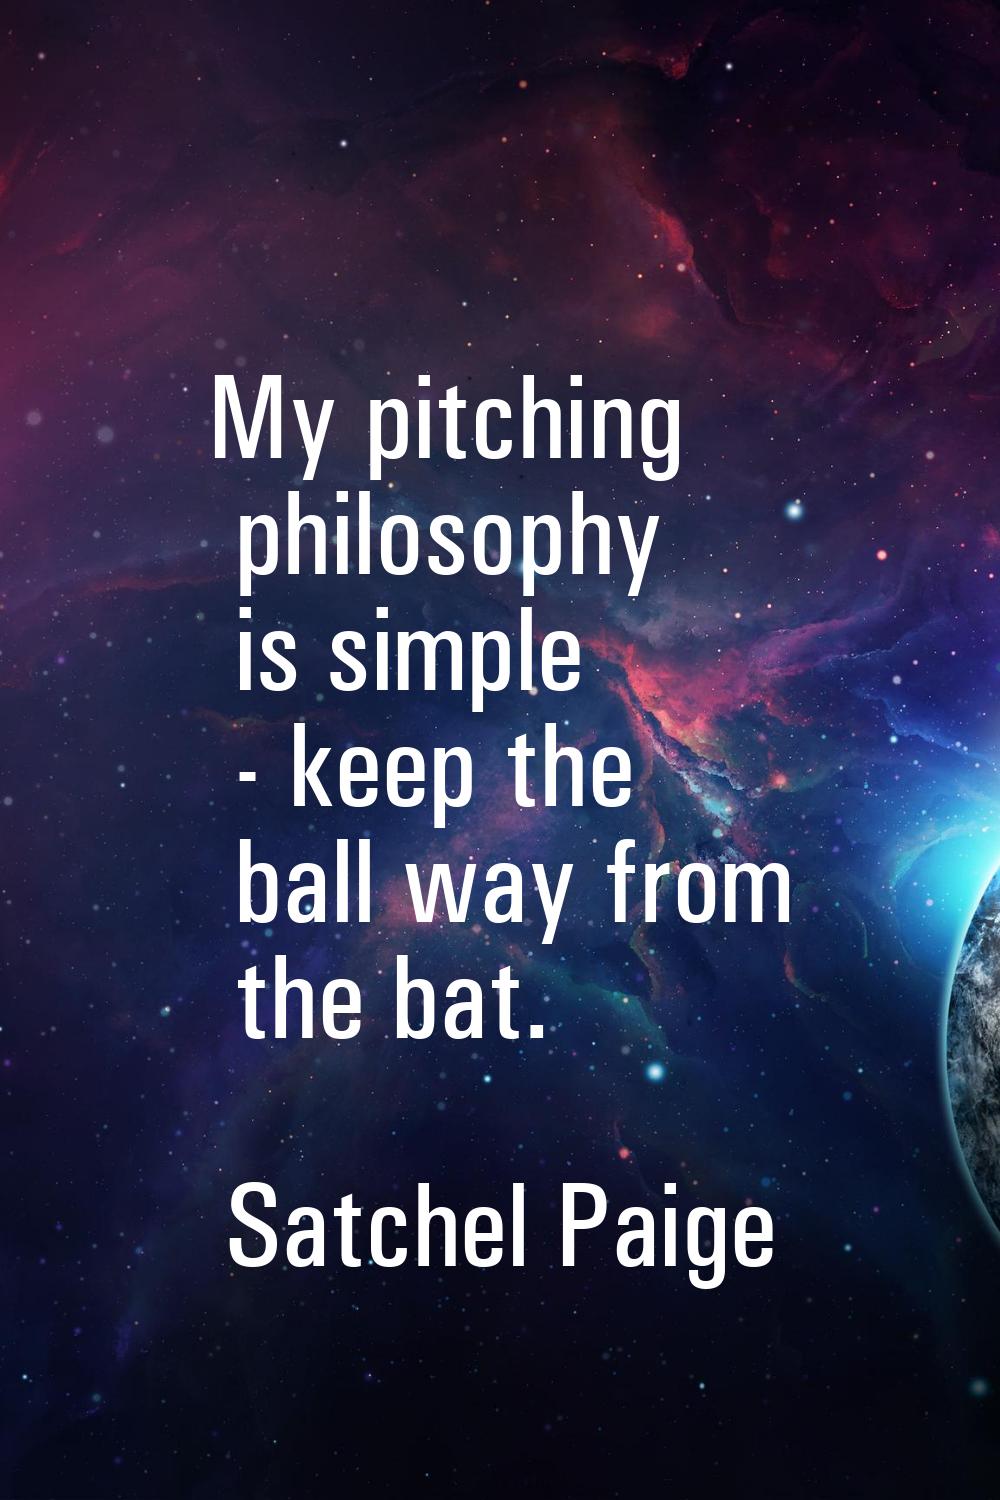 My pitching philosophy is simple - keep the ball way from the bat.